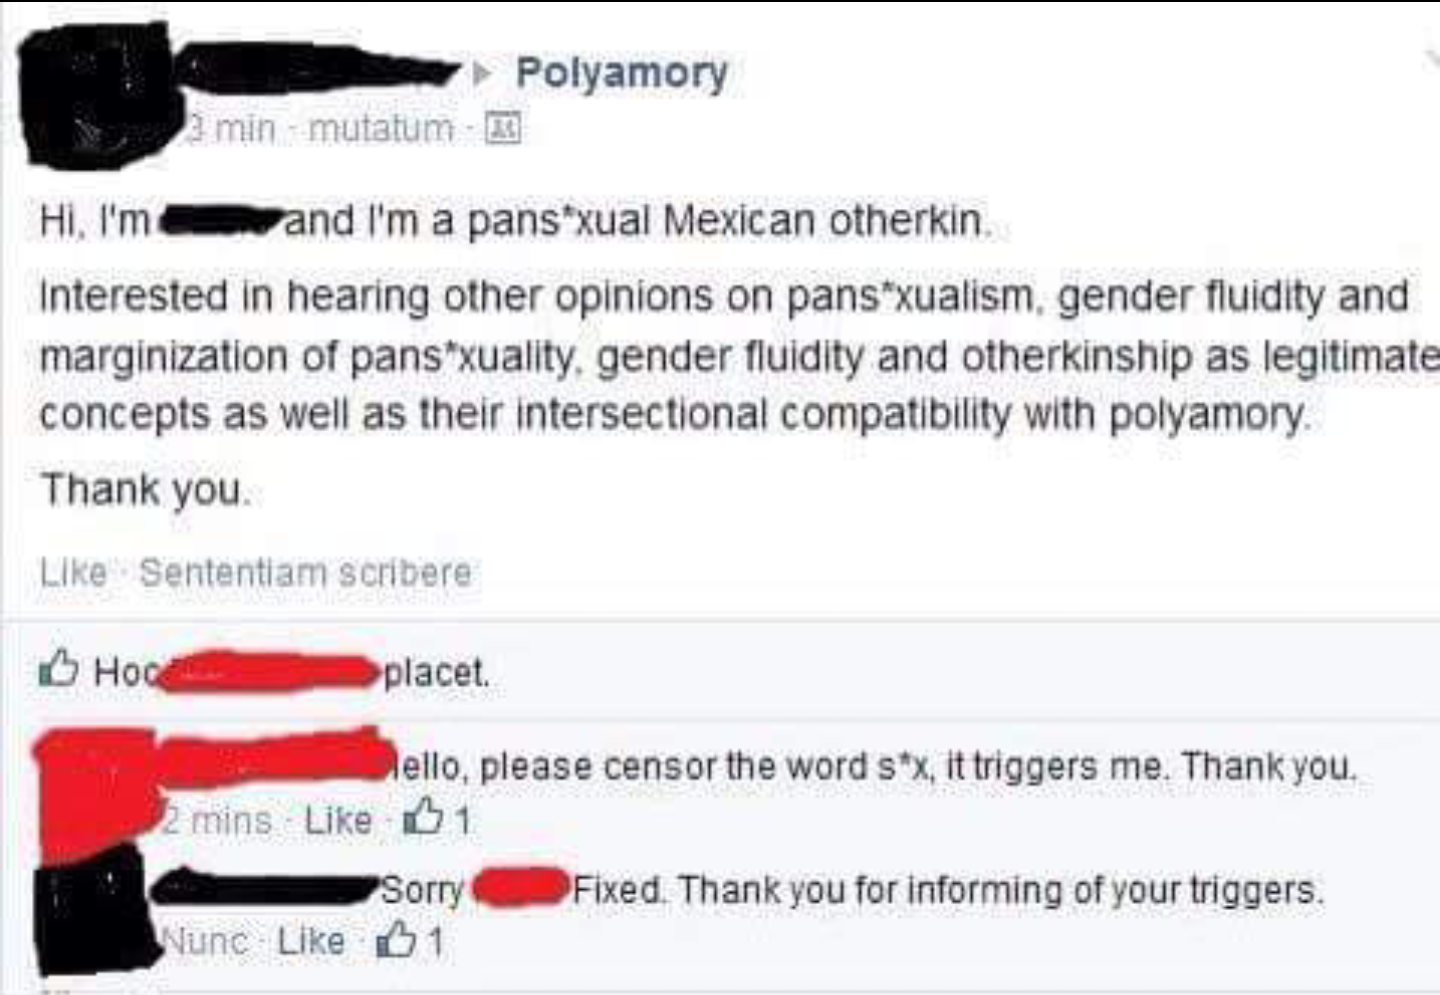 document - Polyamory min mutatum Hi. I'm and I'm a pansxual Mexican otherkin Interested in hearing other opinions on pans"xualism. gender fluidity and marginization of pansxuality, gender fluidity and otherkinship as legitimate concepts as well as their…